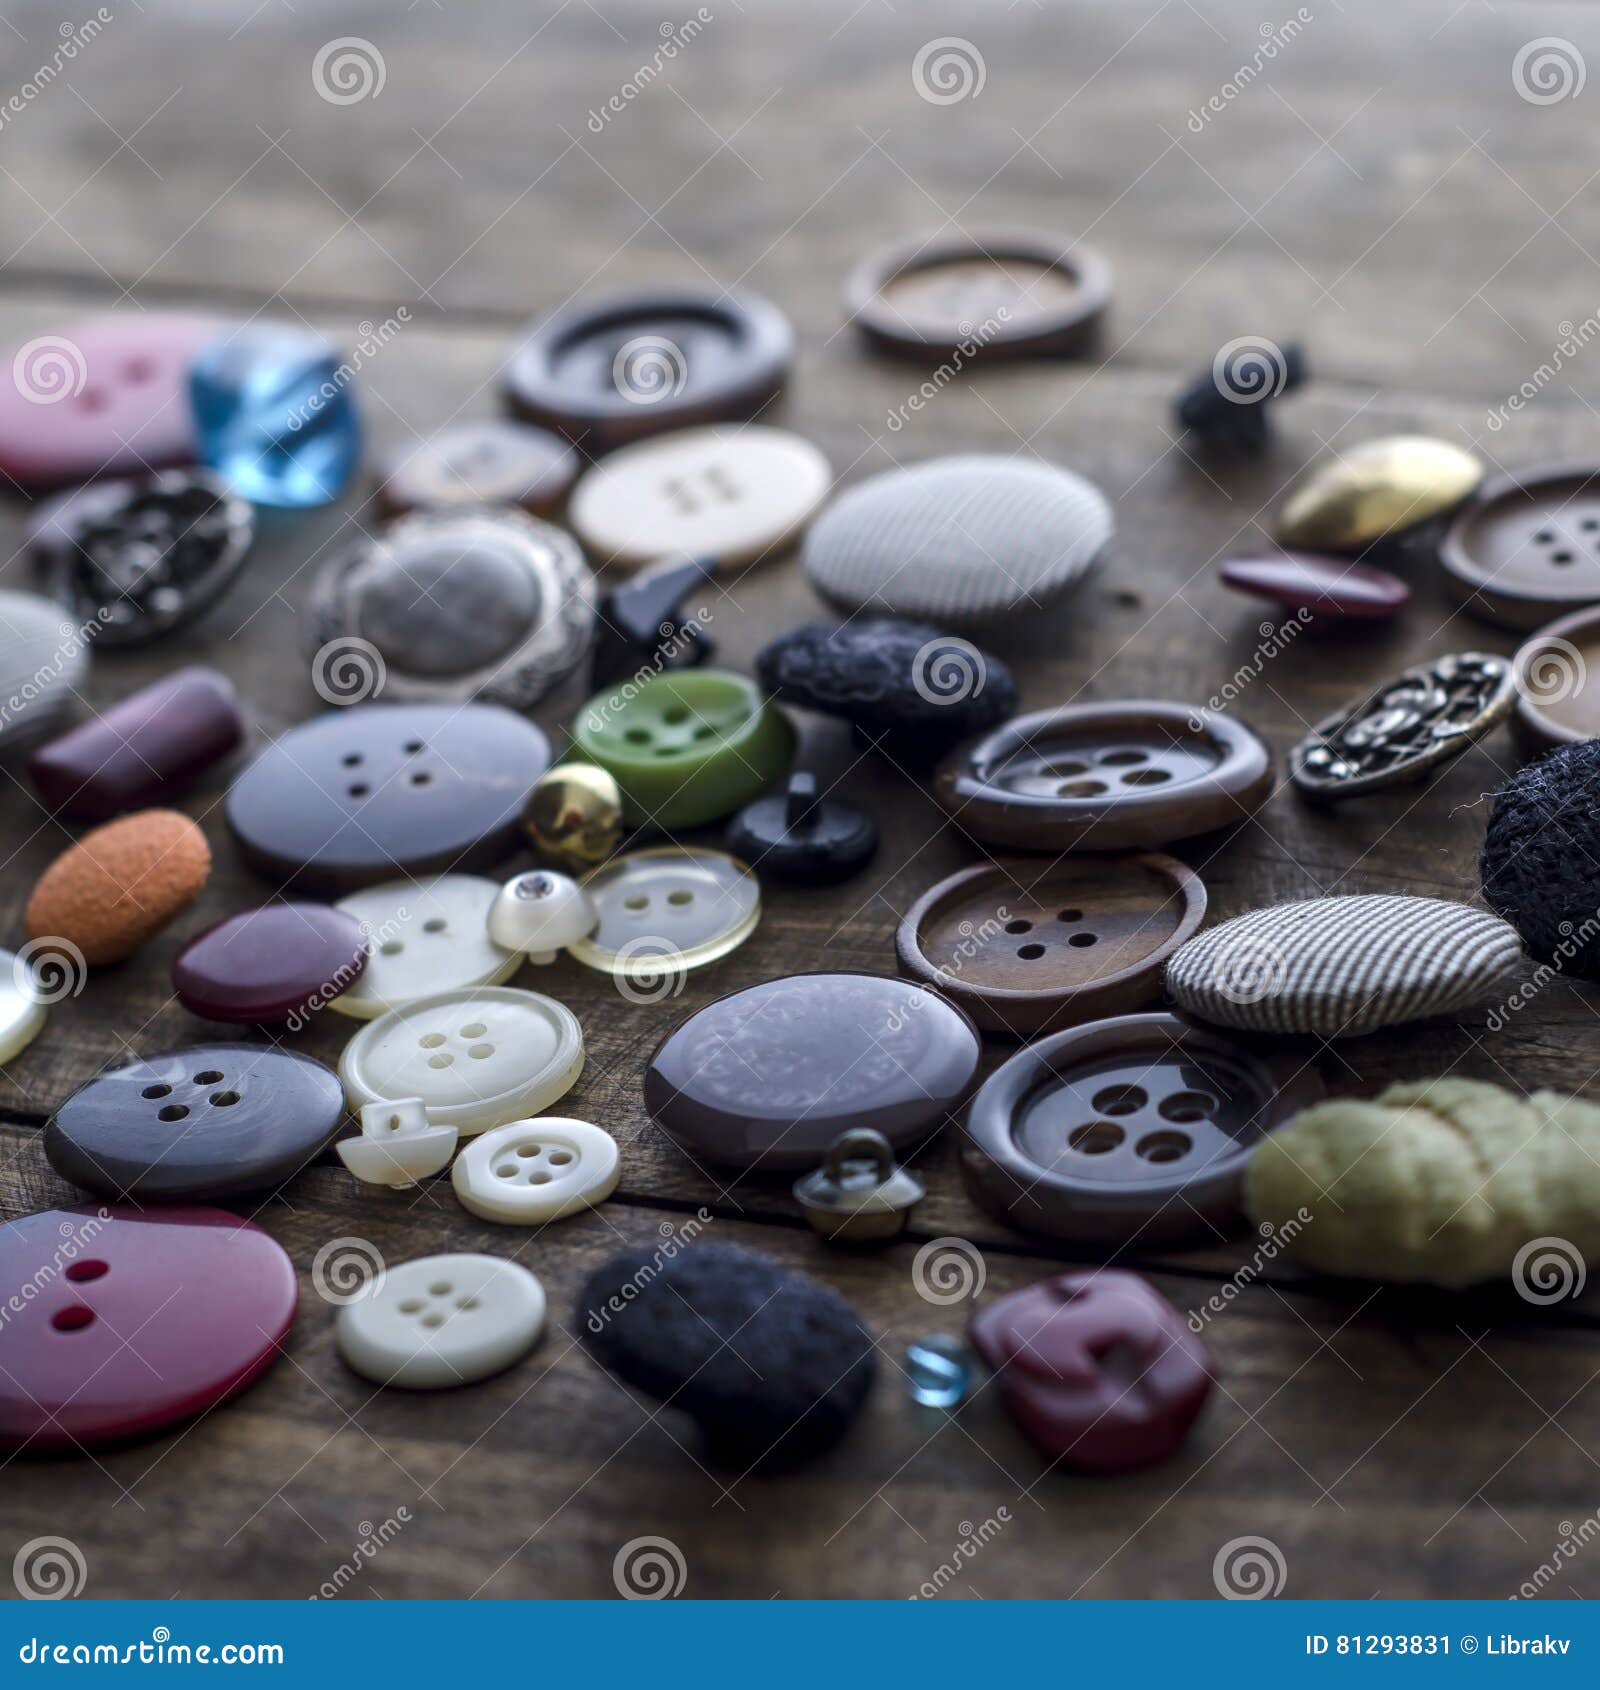 Lot of Vintage Buttons on Old Wooden Table Stock Image - Image of ...